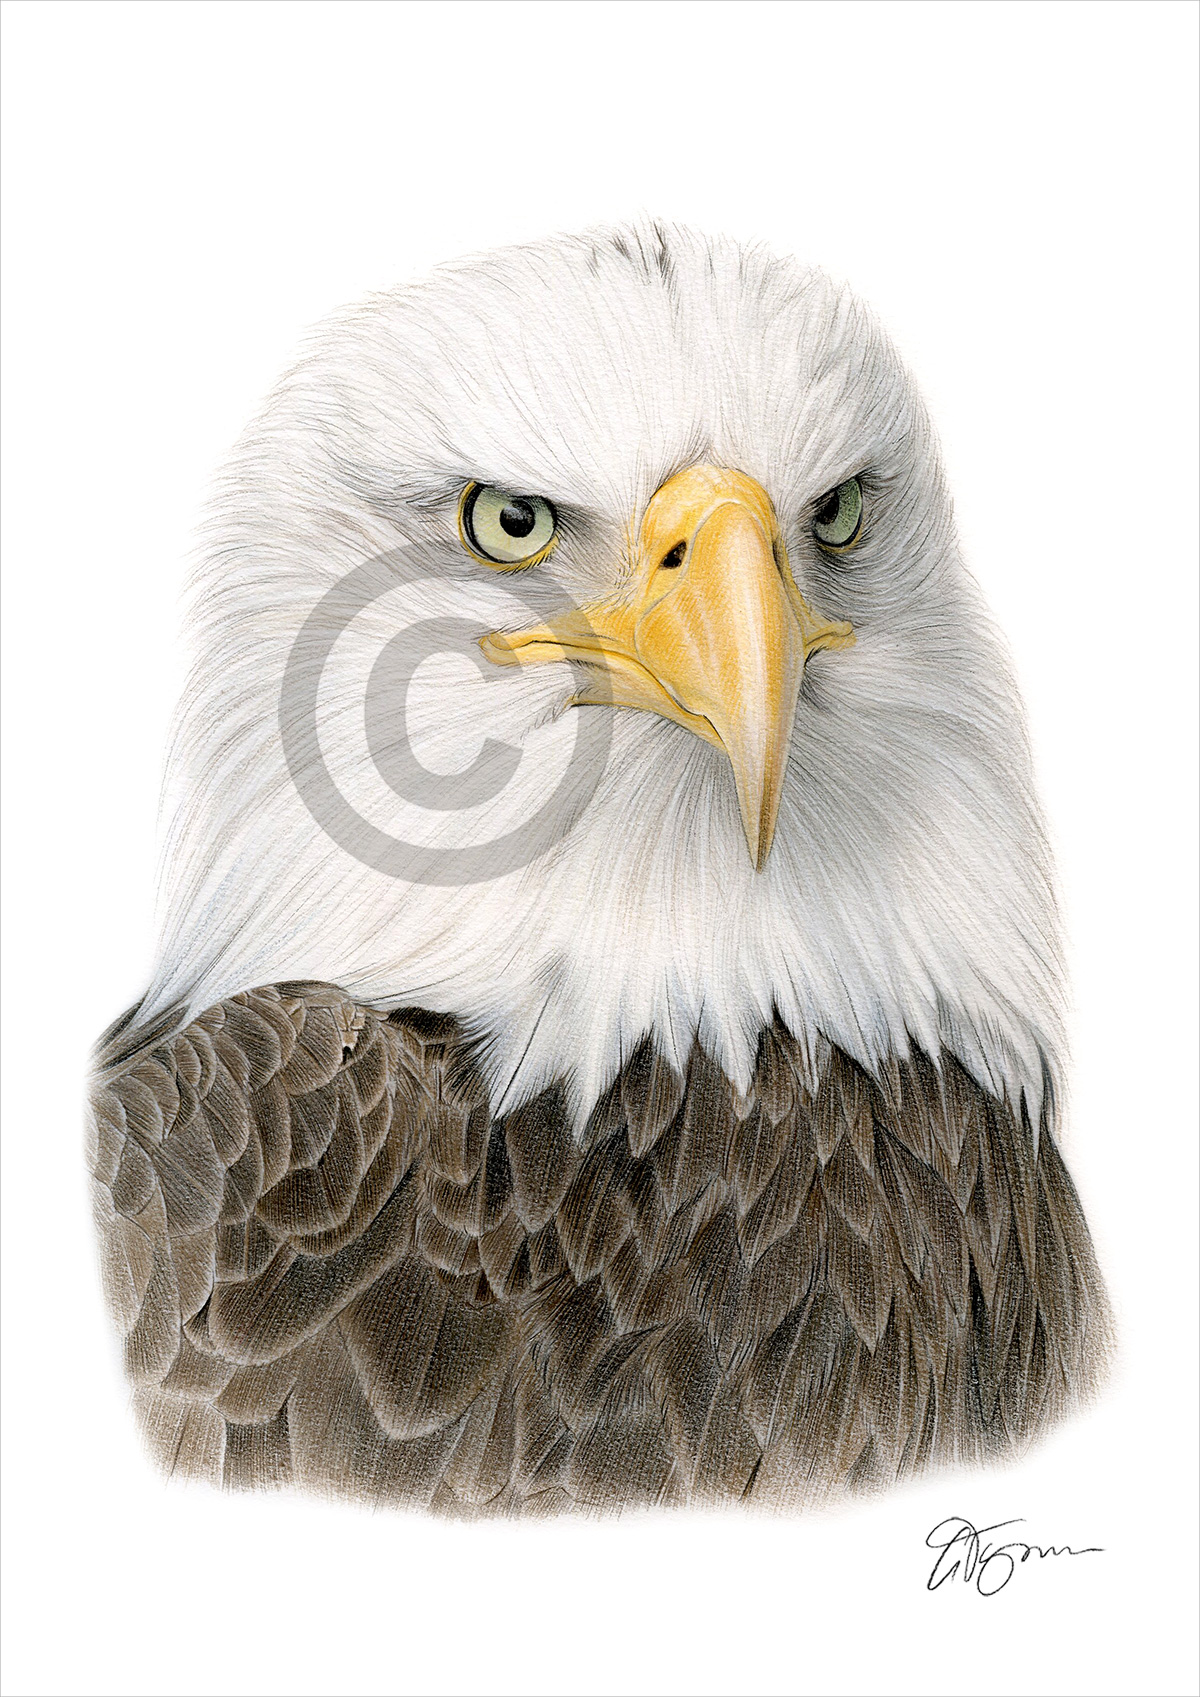 Colour pencil drawing of a bald eagle by artist Gary Tymon